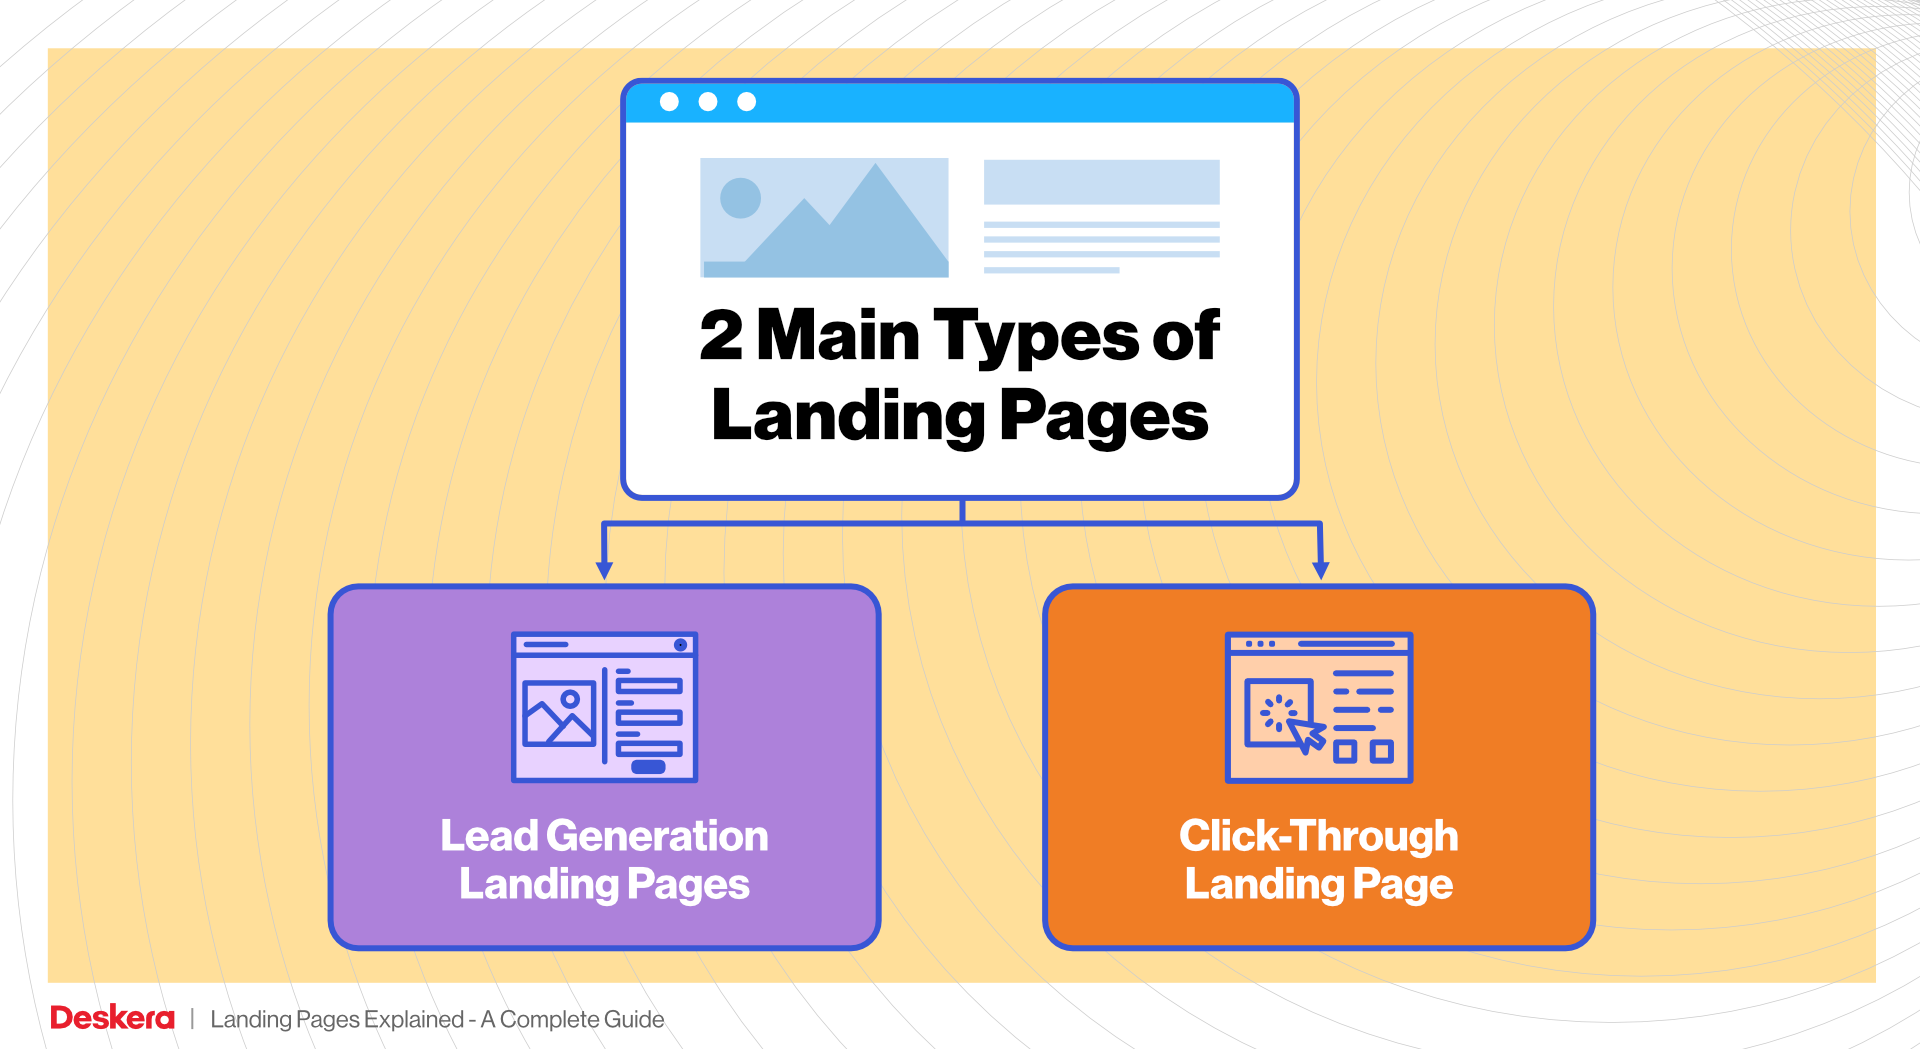 2 Main Types of Landing Pages